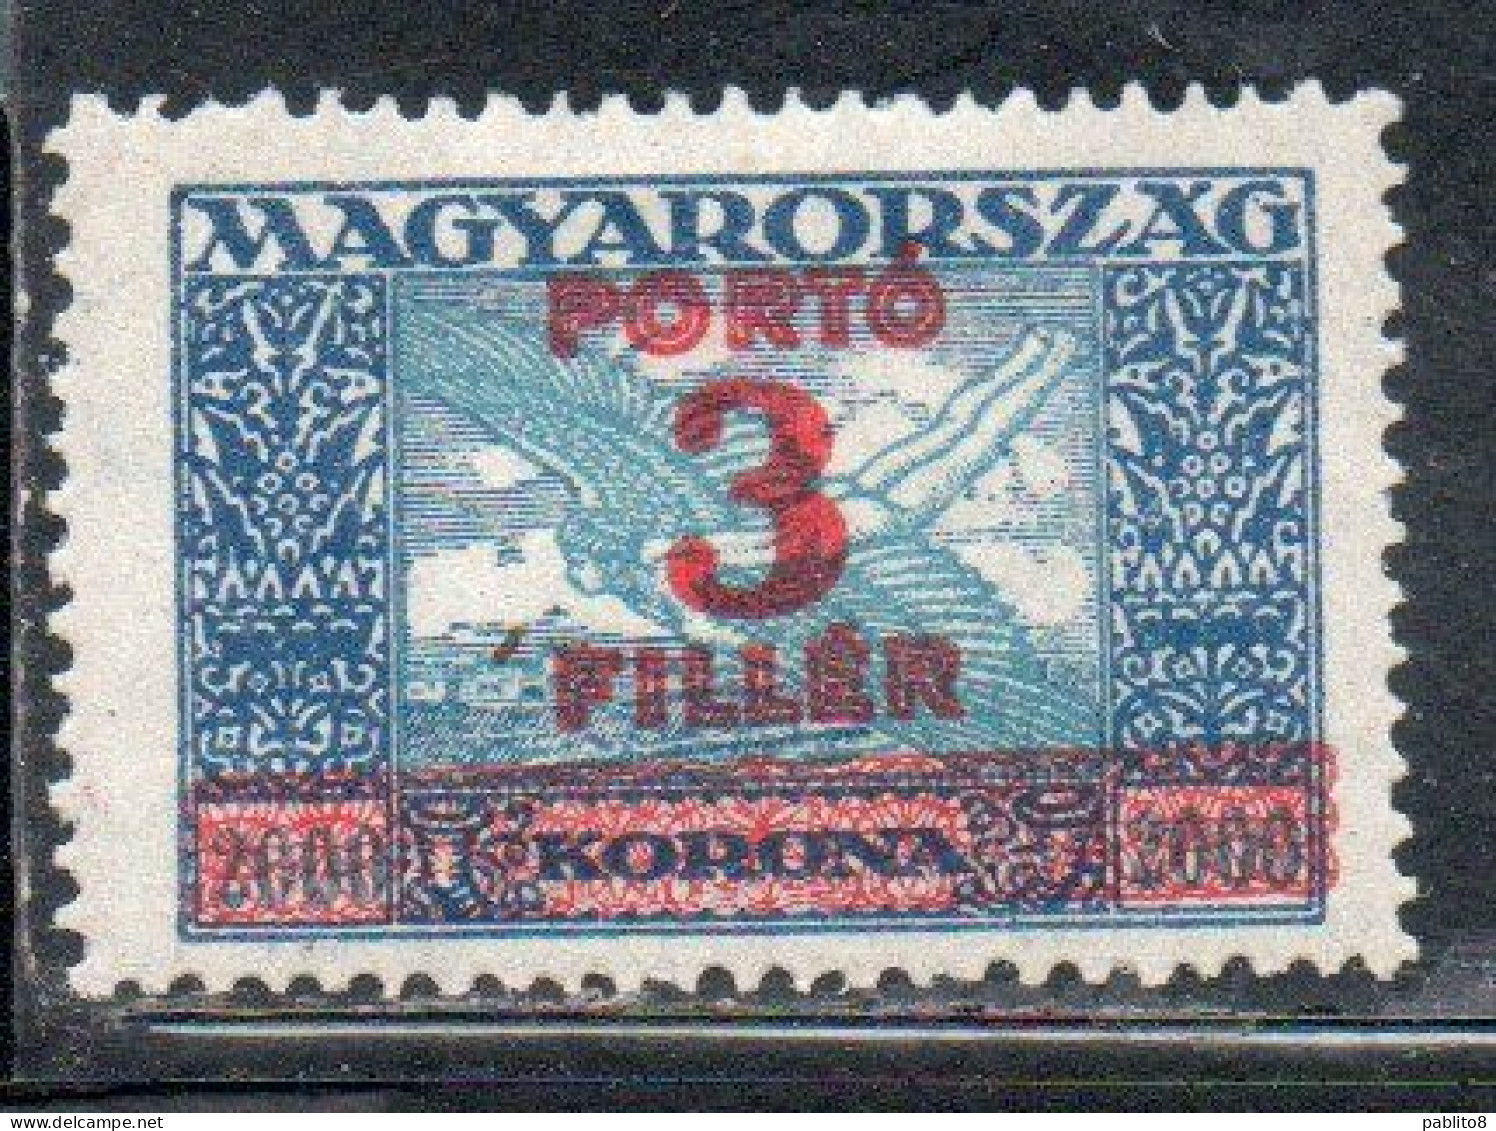 HUNGARY UNGHERIA MAGYAR 1926 POSTAGE DUE STAMPS TAXE SURCHARGED 3f On 2000k MLH - Port Dû (Taxe)